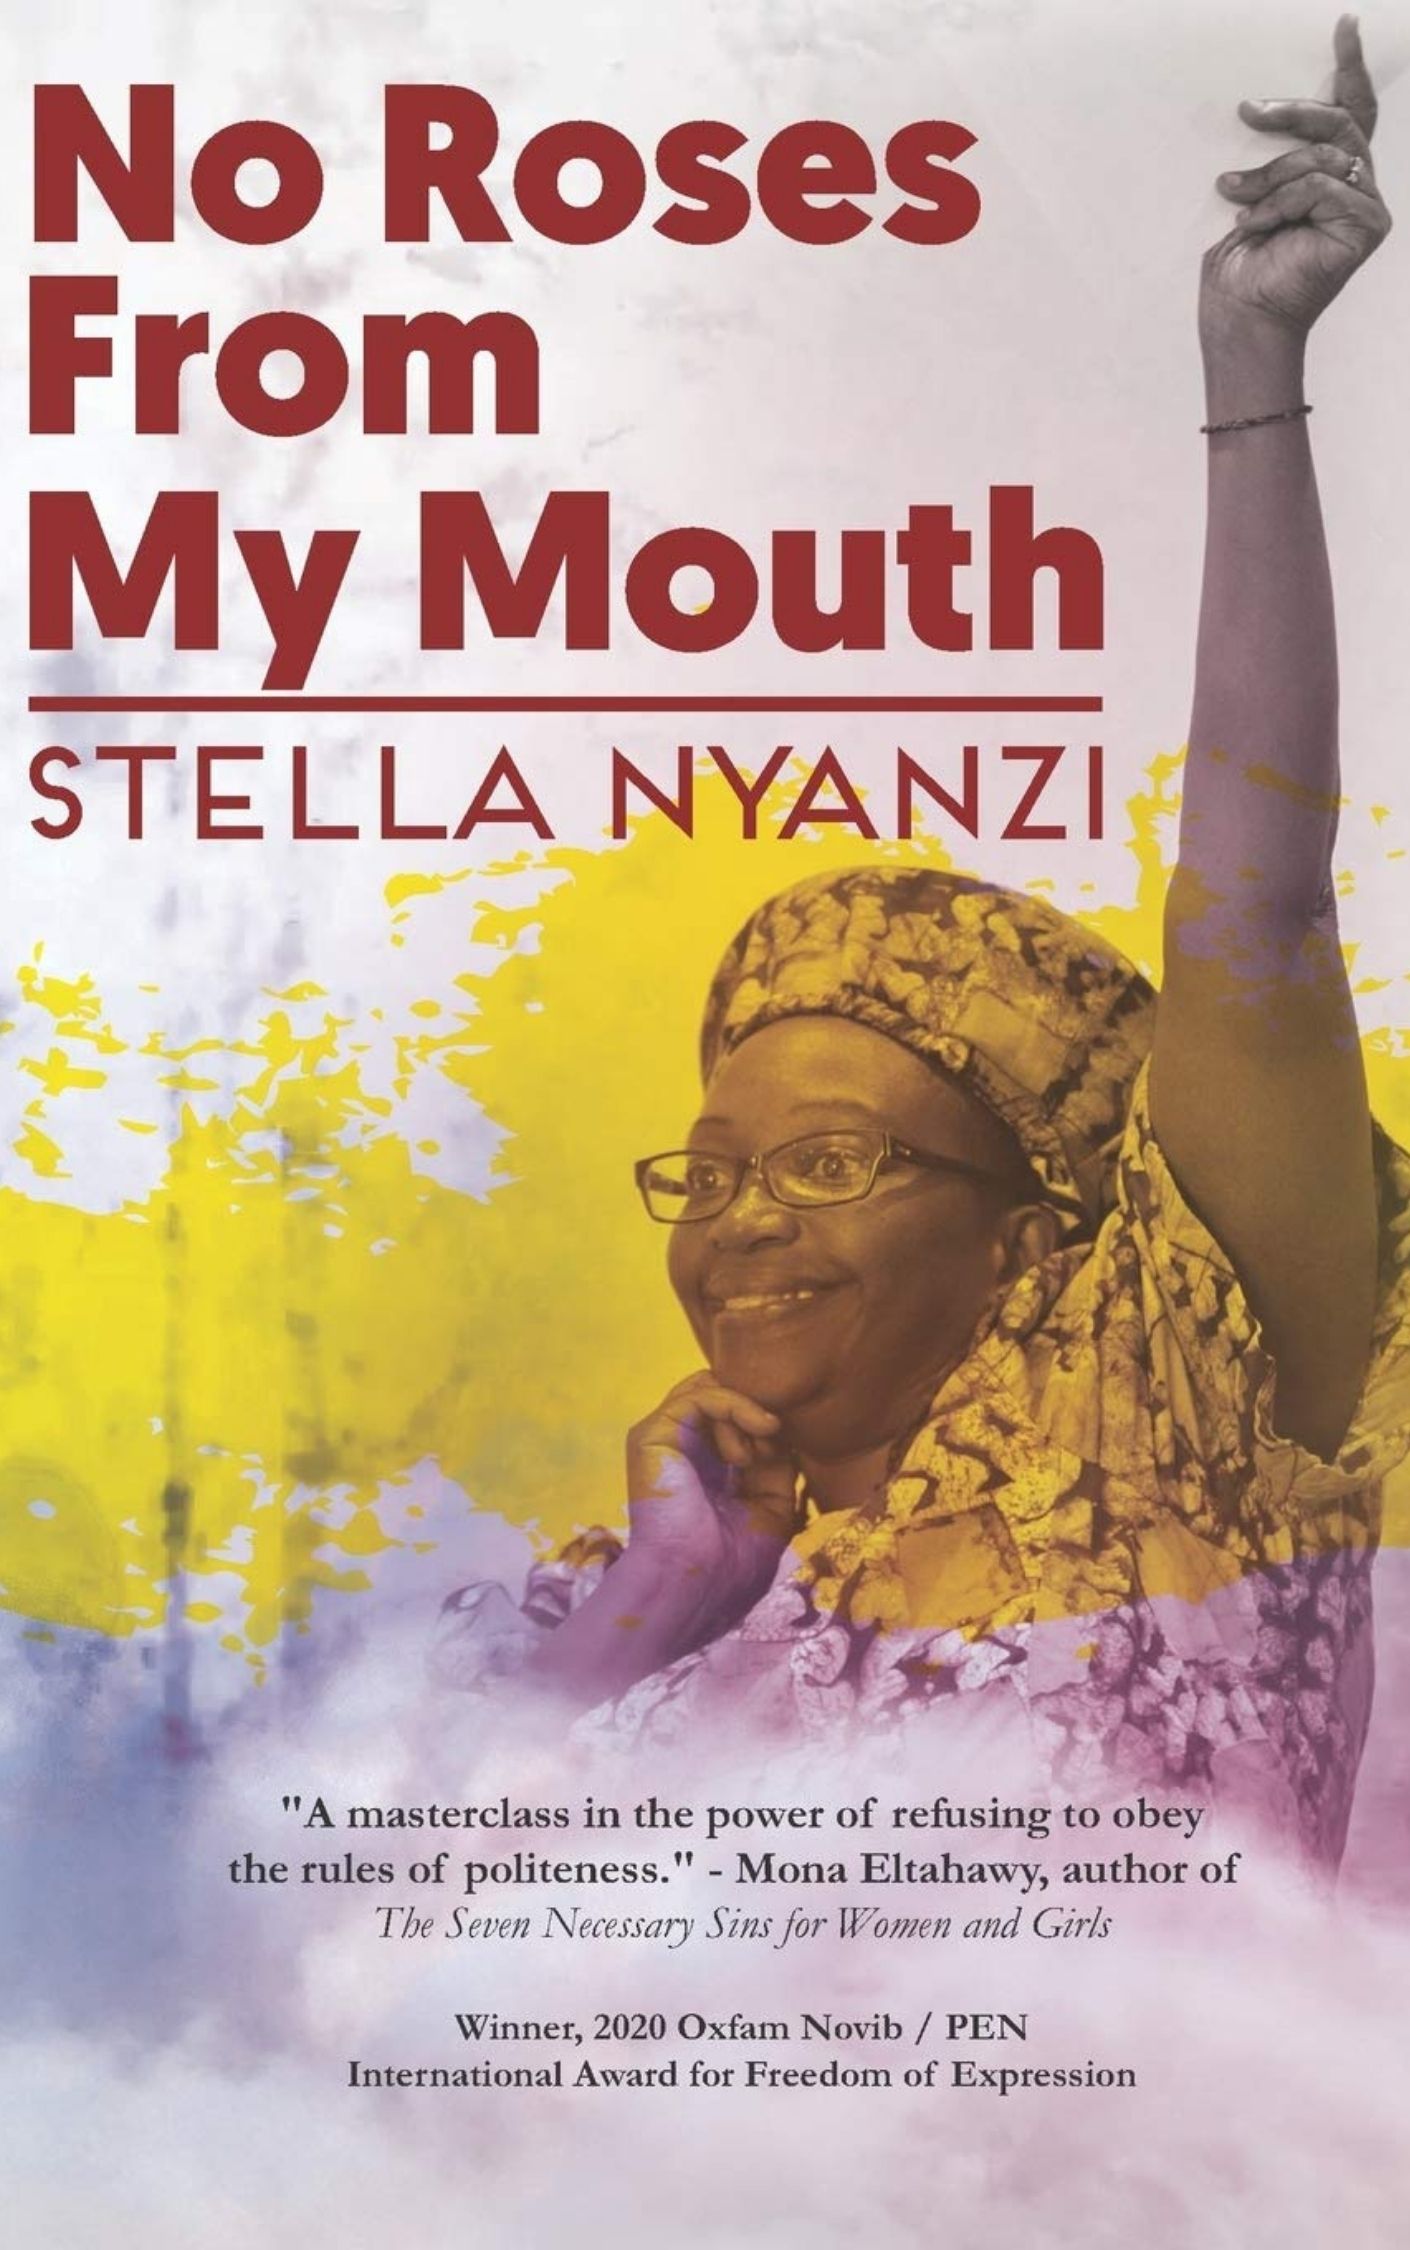 Stella Nyanzi's No Roses From My Mouth